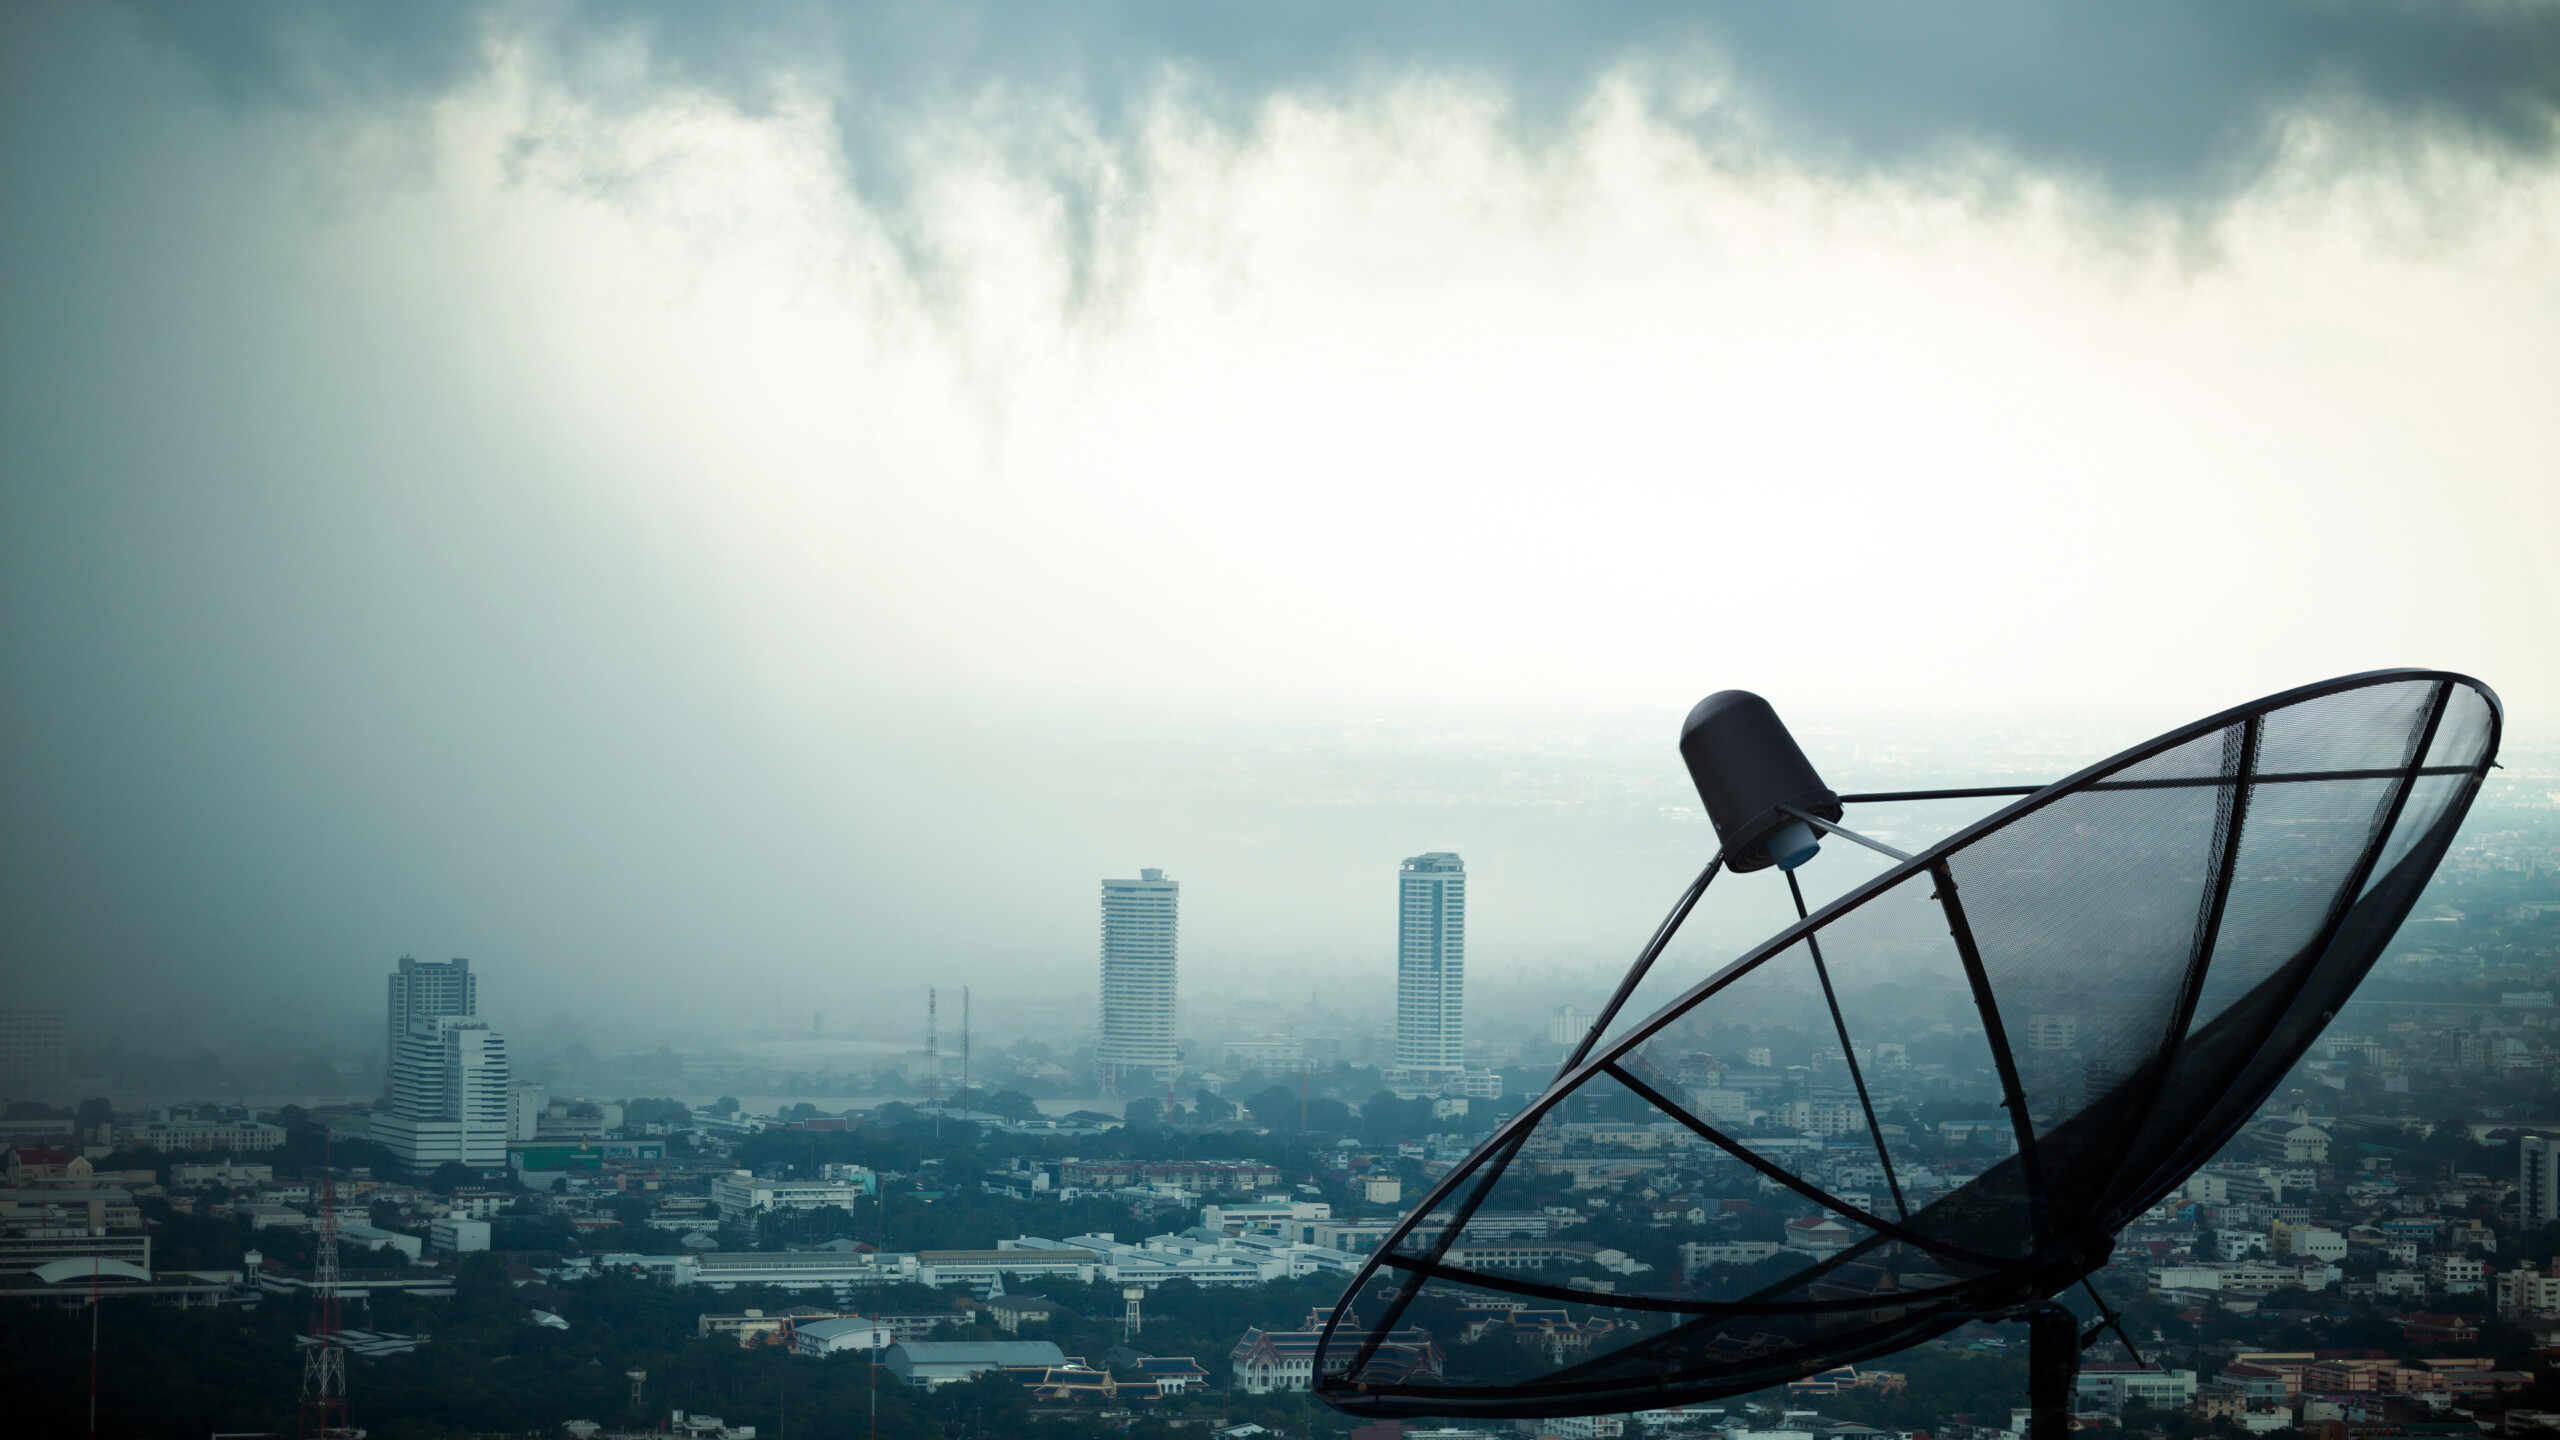 Satellite dish on top of a building in a large city with skyscrapers and other large buildings; the sky is dark and cloudy.